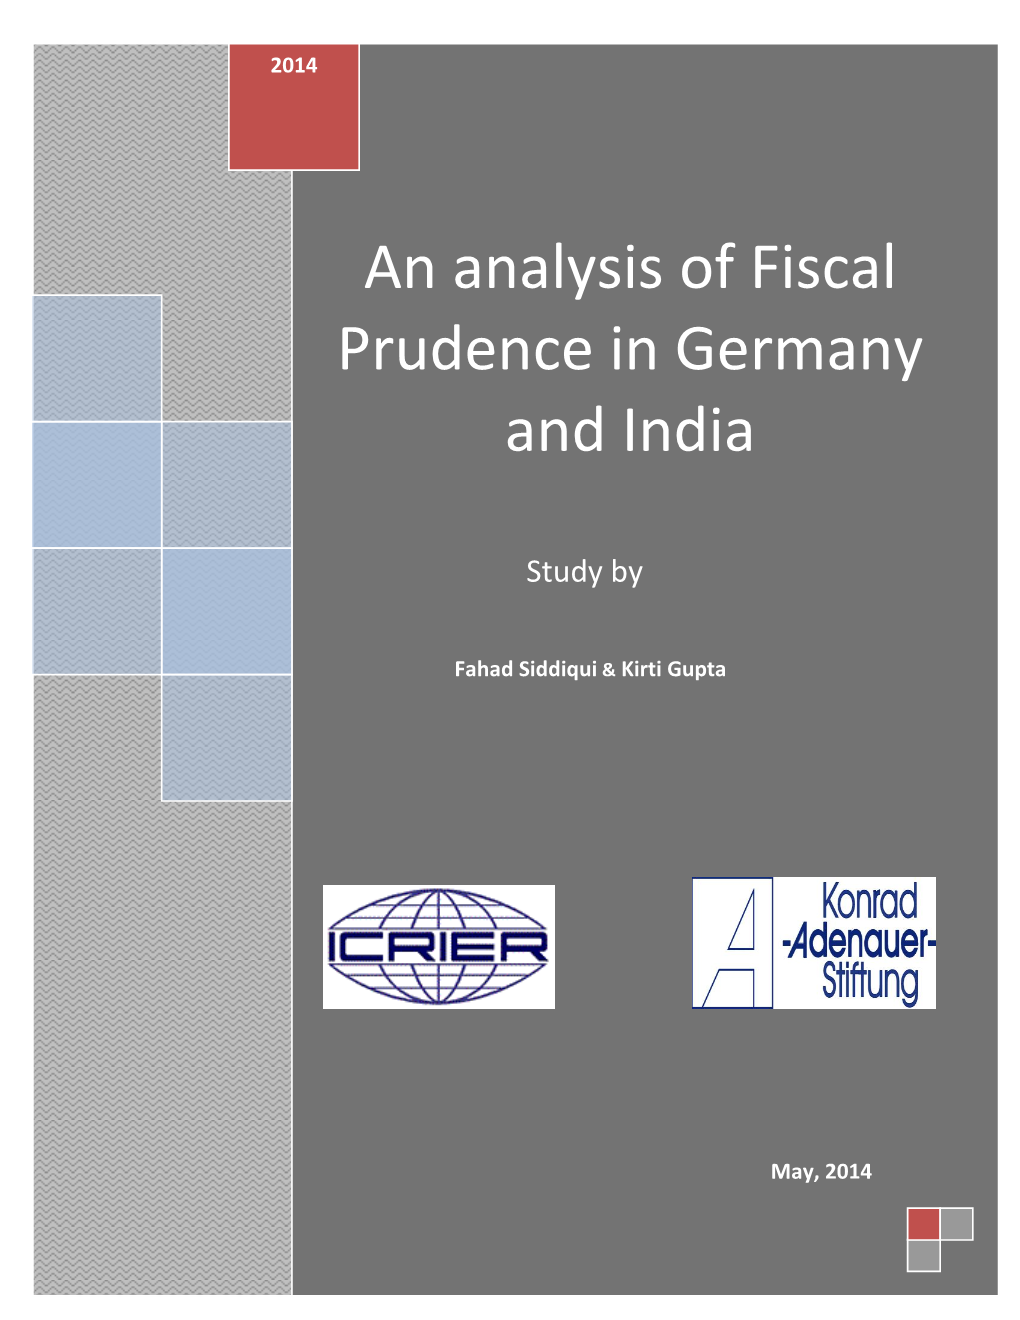 An Analysis of Fiscal Prudence in Germany and India